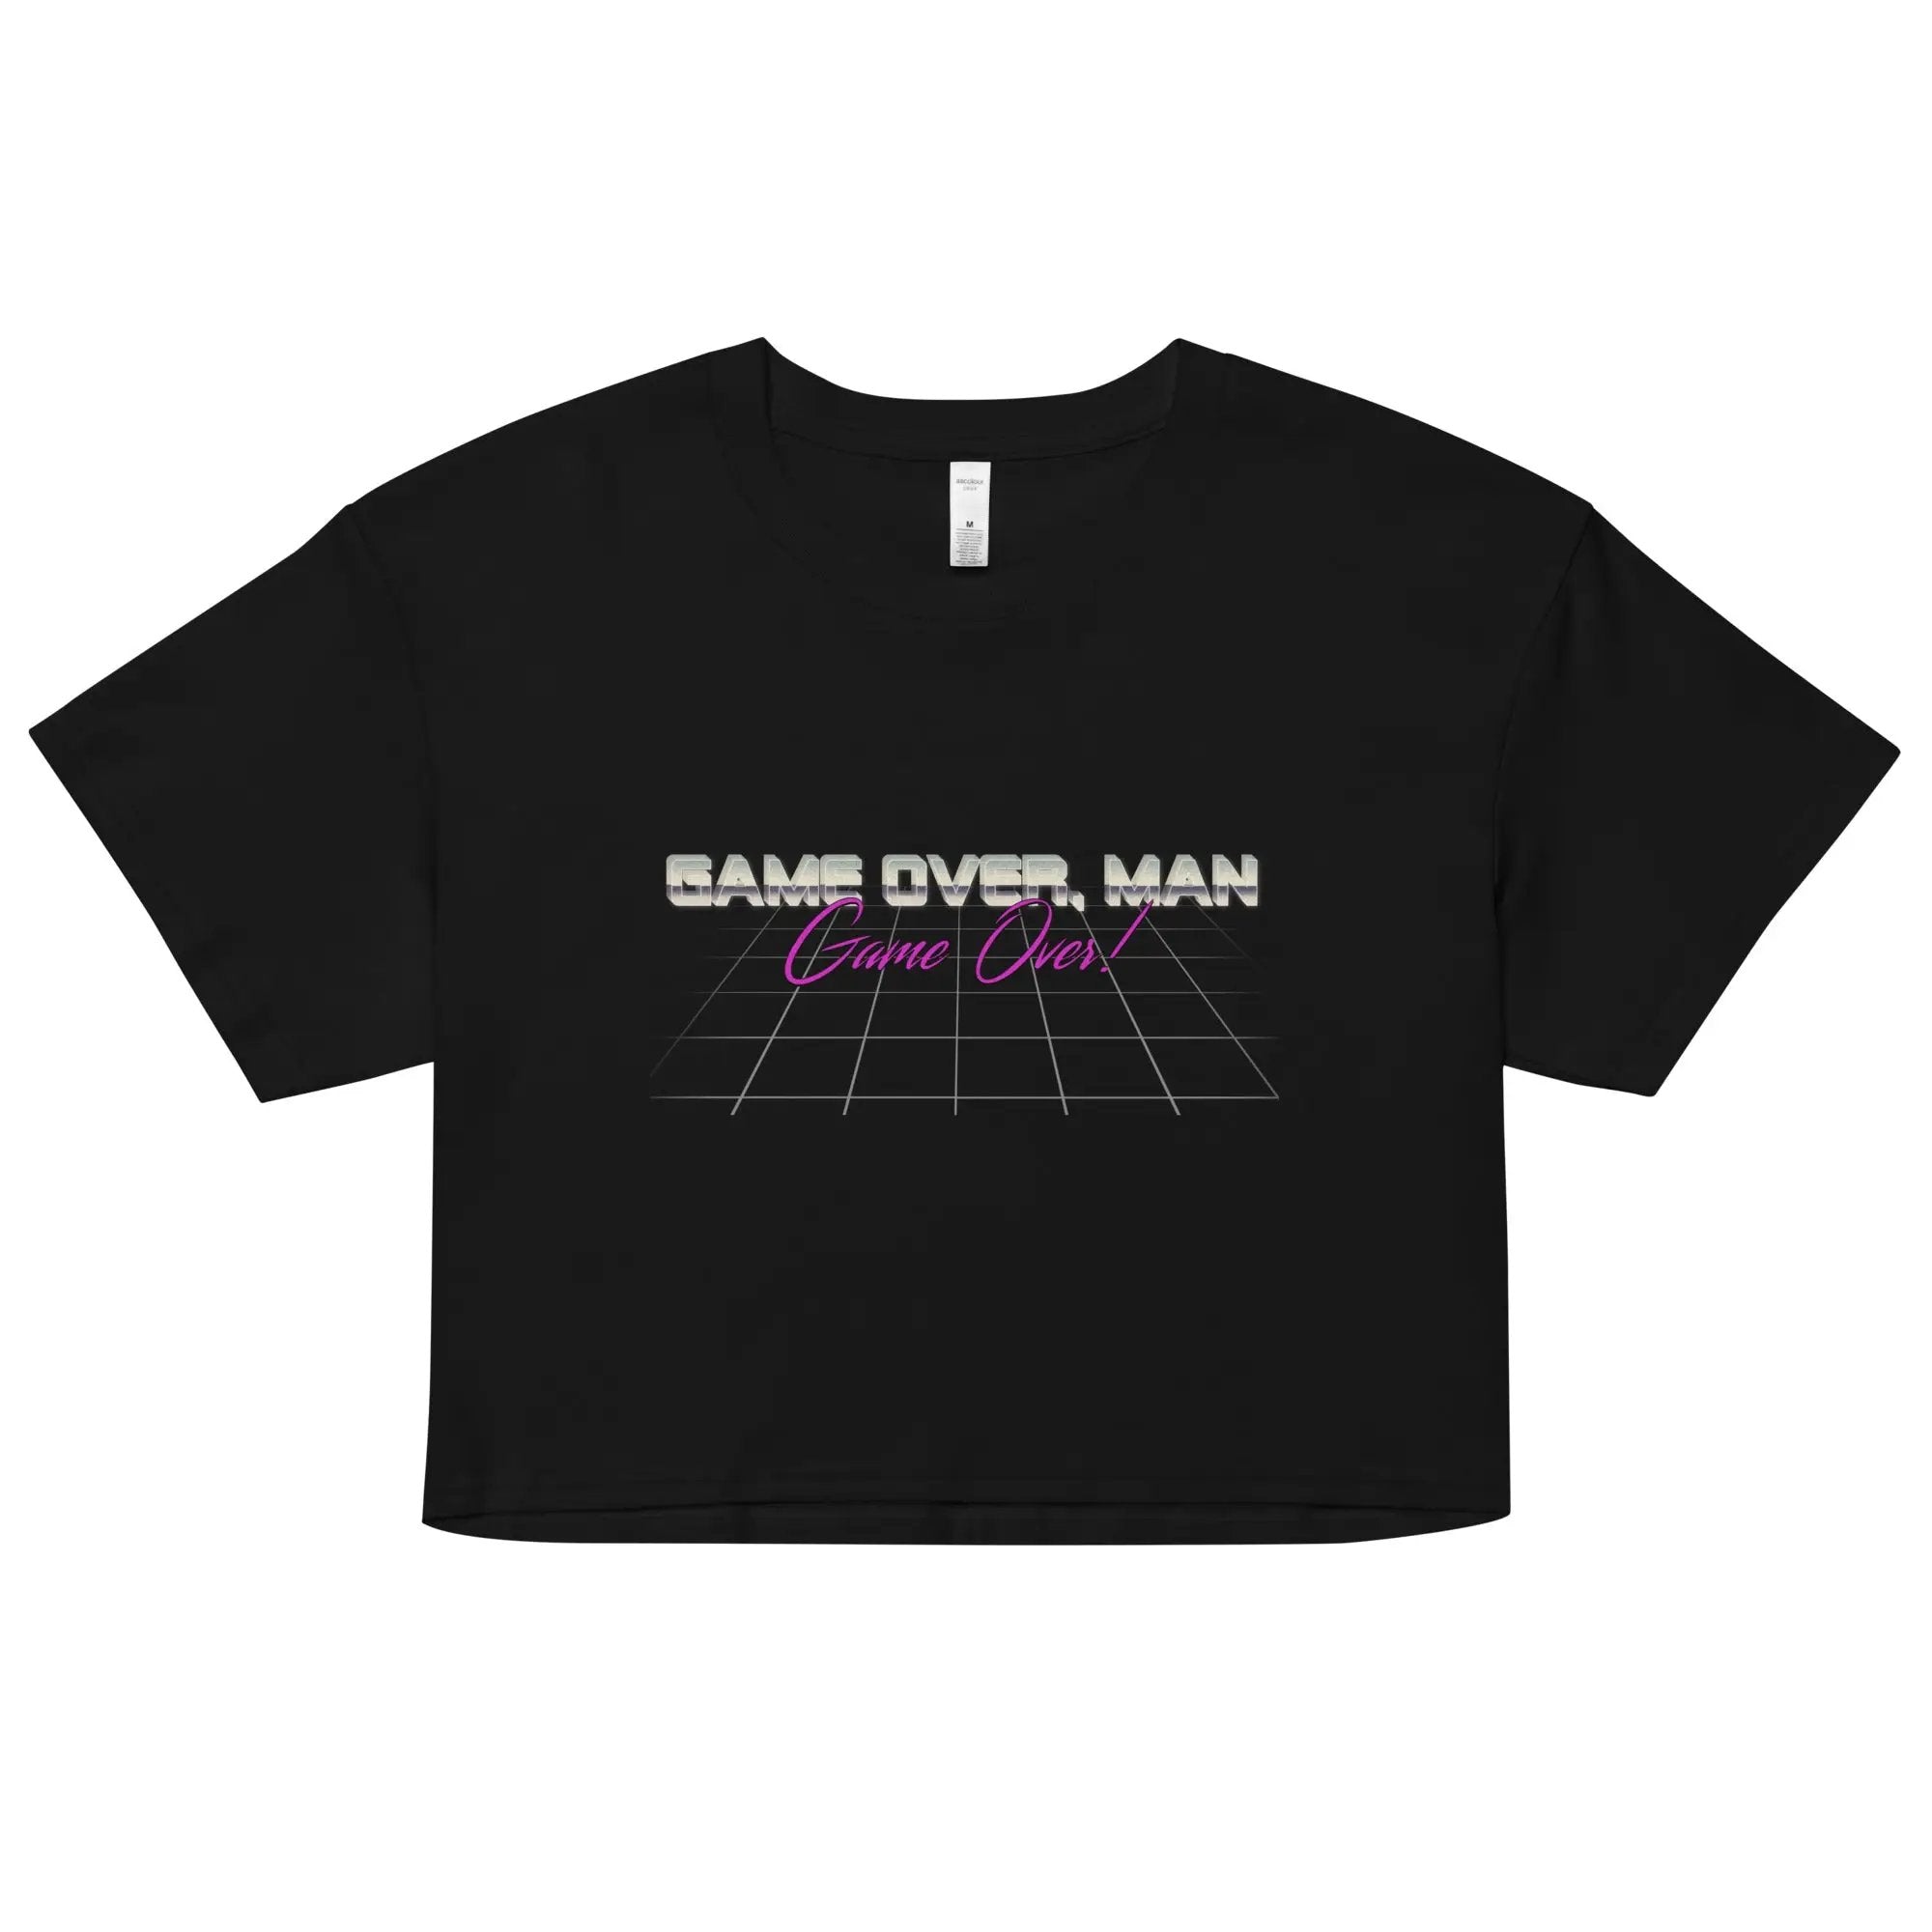 the game over man crop top in black